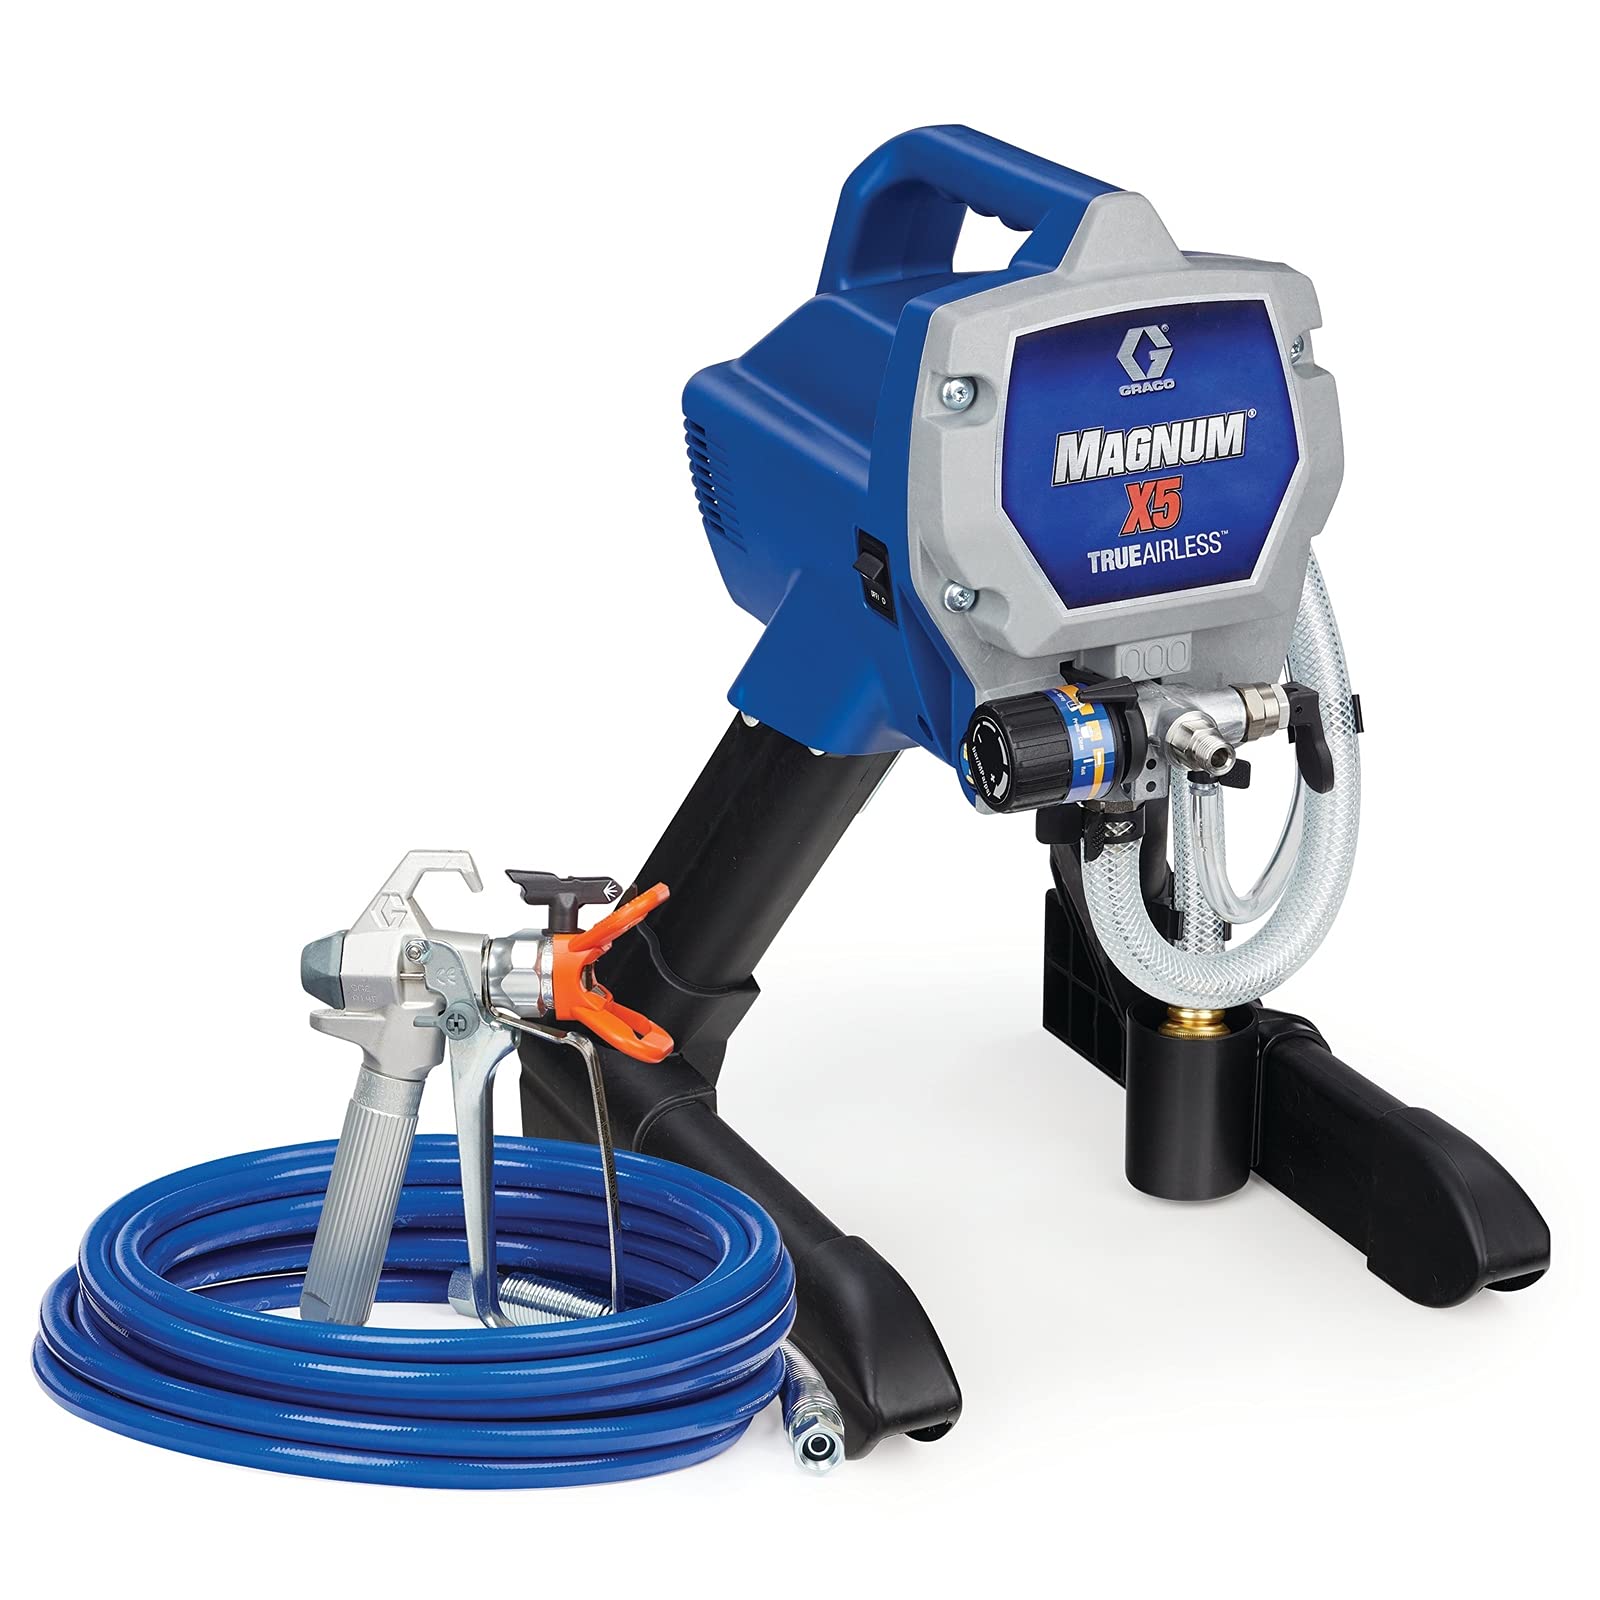 Graco Magnum 262800 X5 Stand Airless Paint Sprayer, Blue & 243041 Magnum 15-Inch Tip Extension, Gray